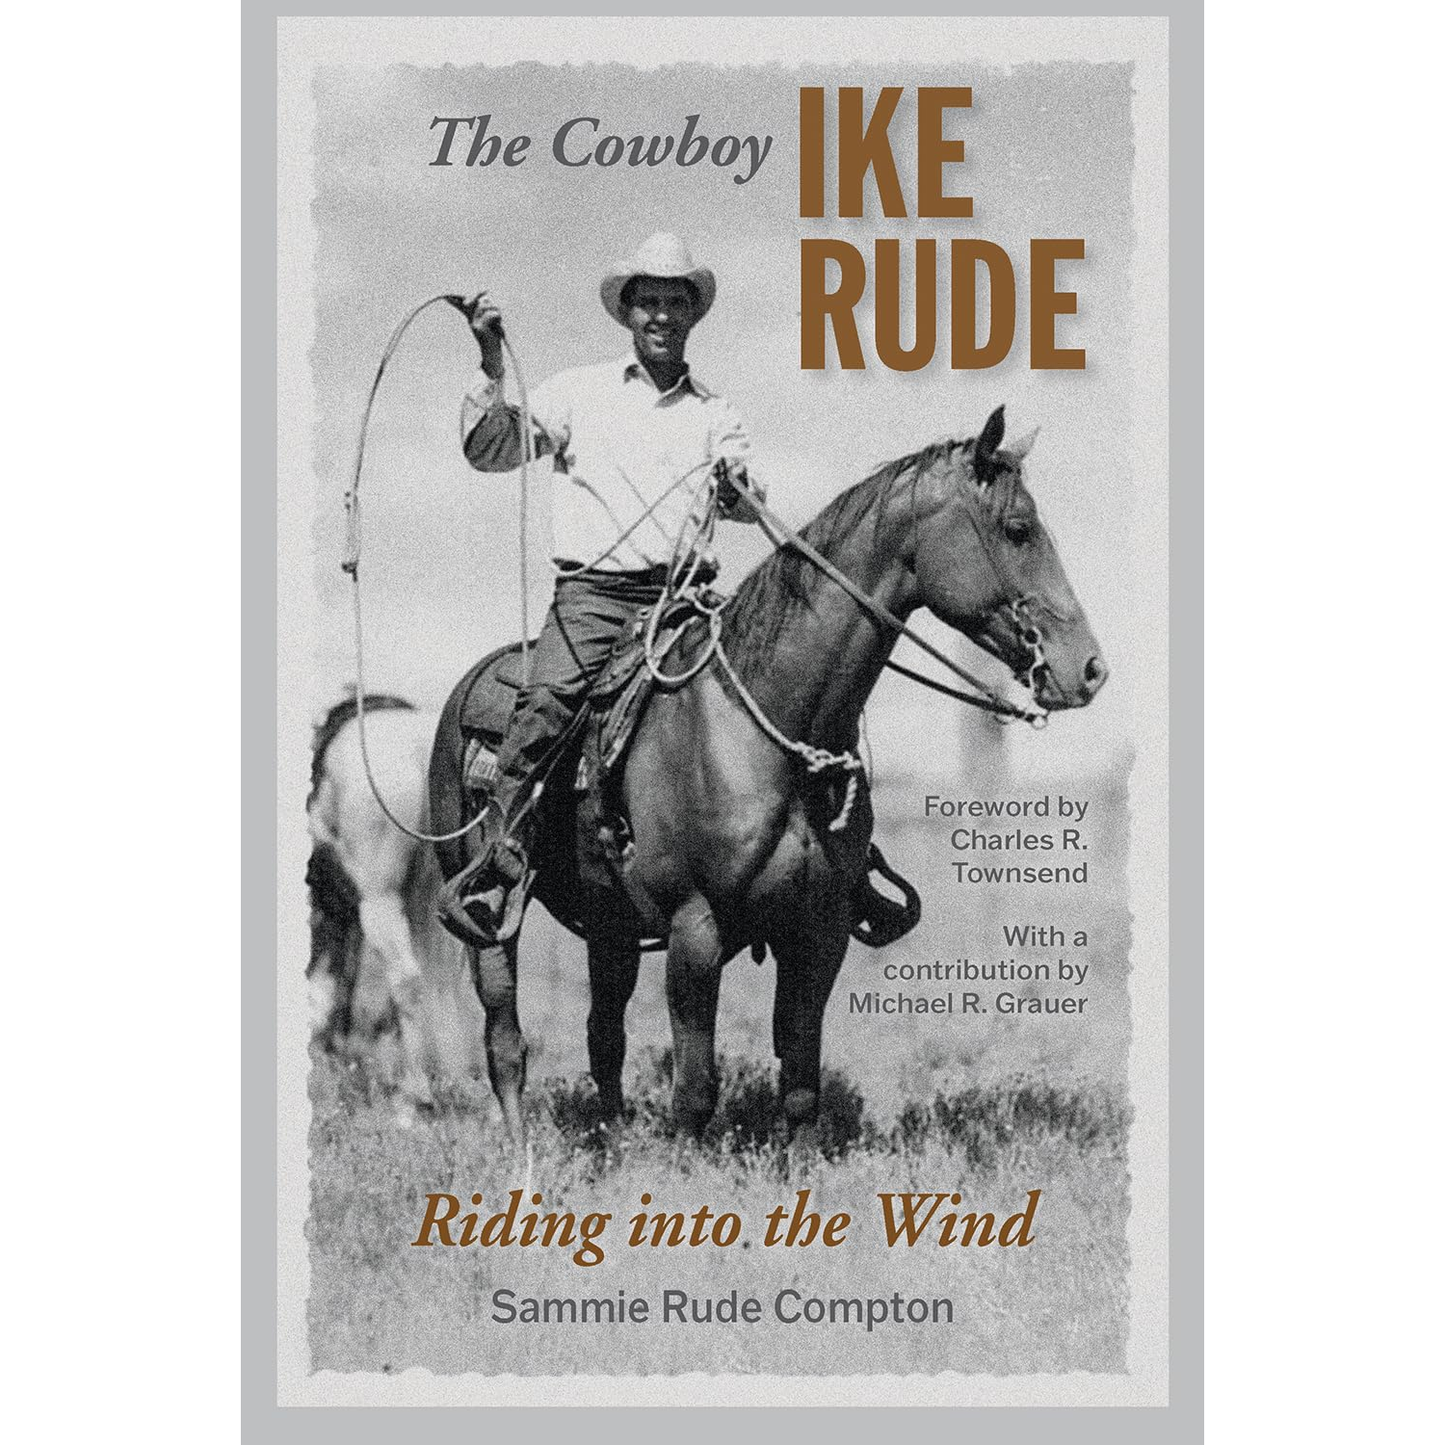 The Cowboy Ike Rude: Riding into the Wind by Sammie Rude Compton